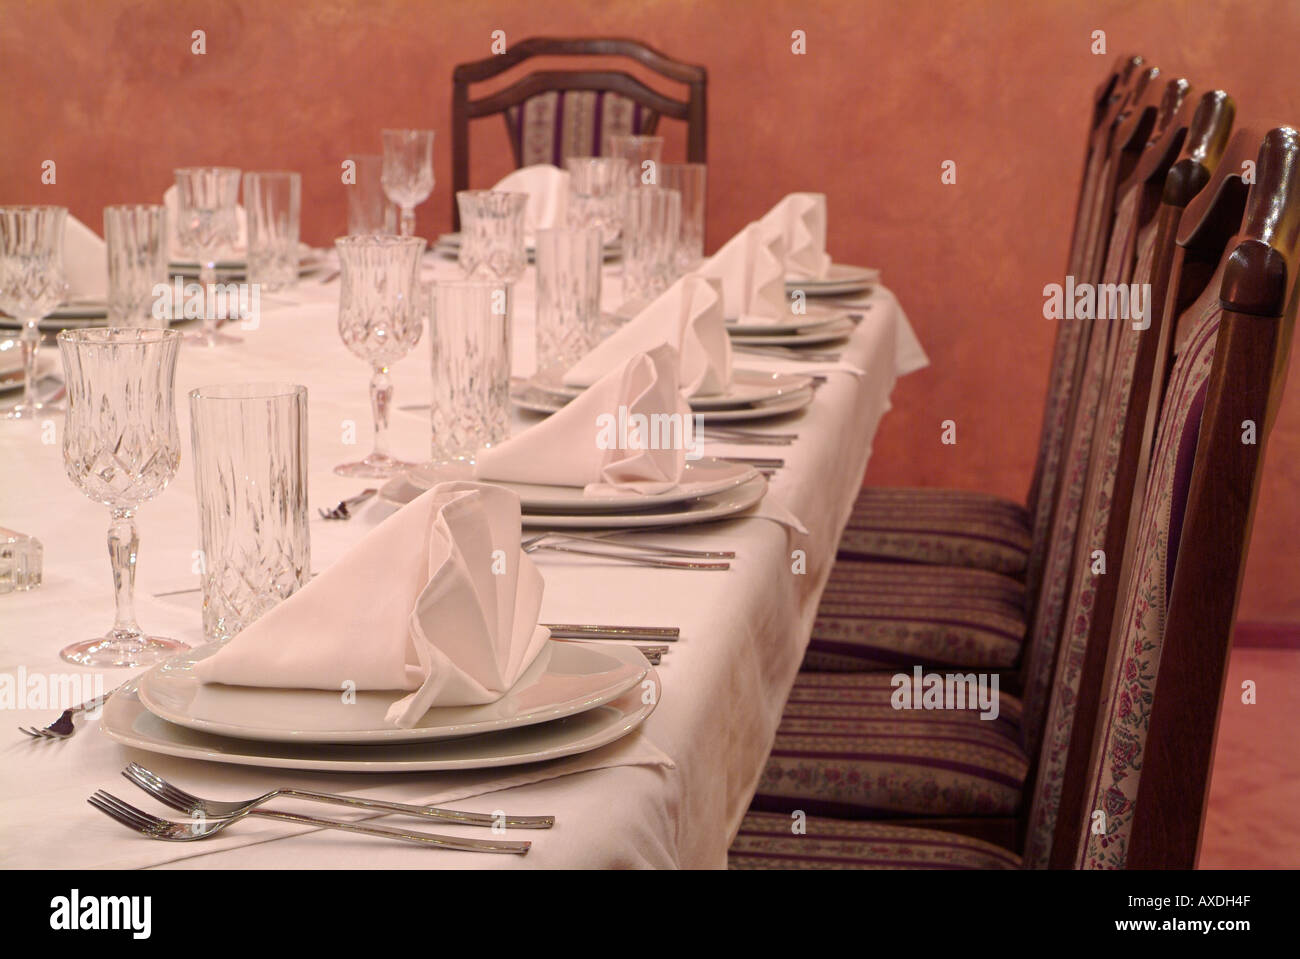 Place Settings on a Dining Table for a Dinner Party Stock Photo